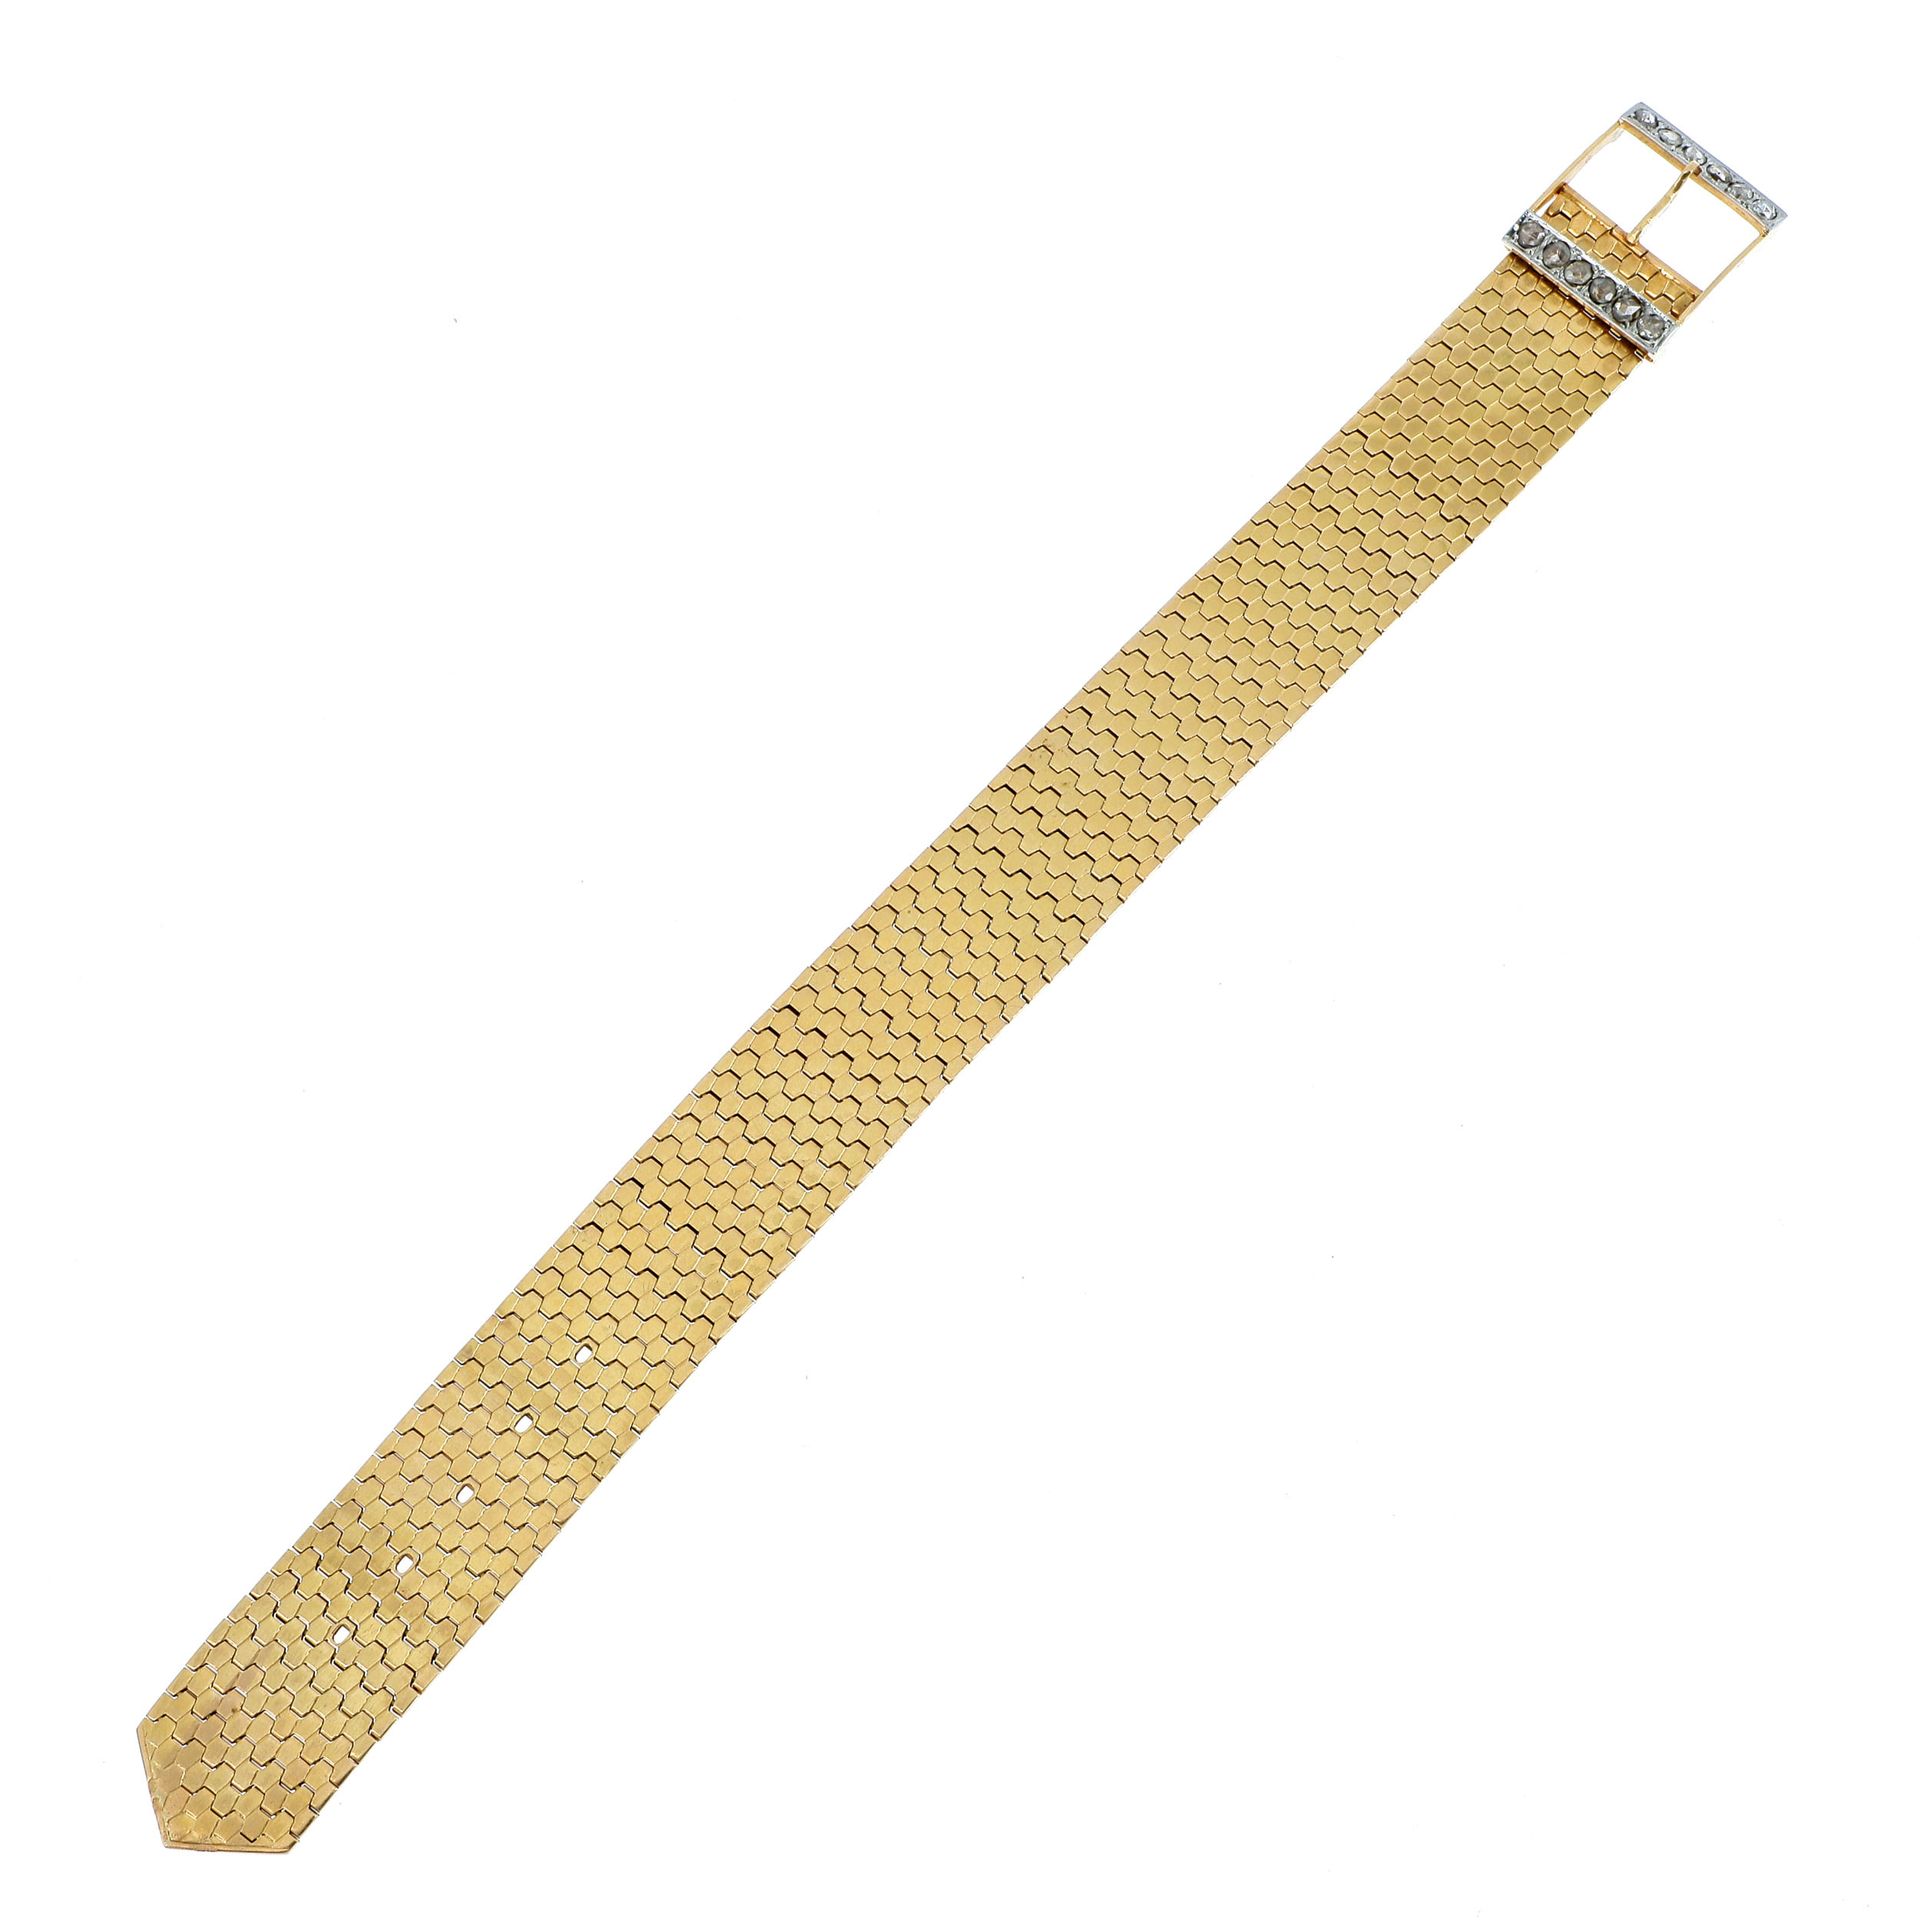 Null BELT BRACELET

in yellow gold, the buckle decorated with diamond tables. 

&hellip;